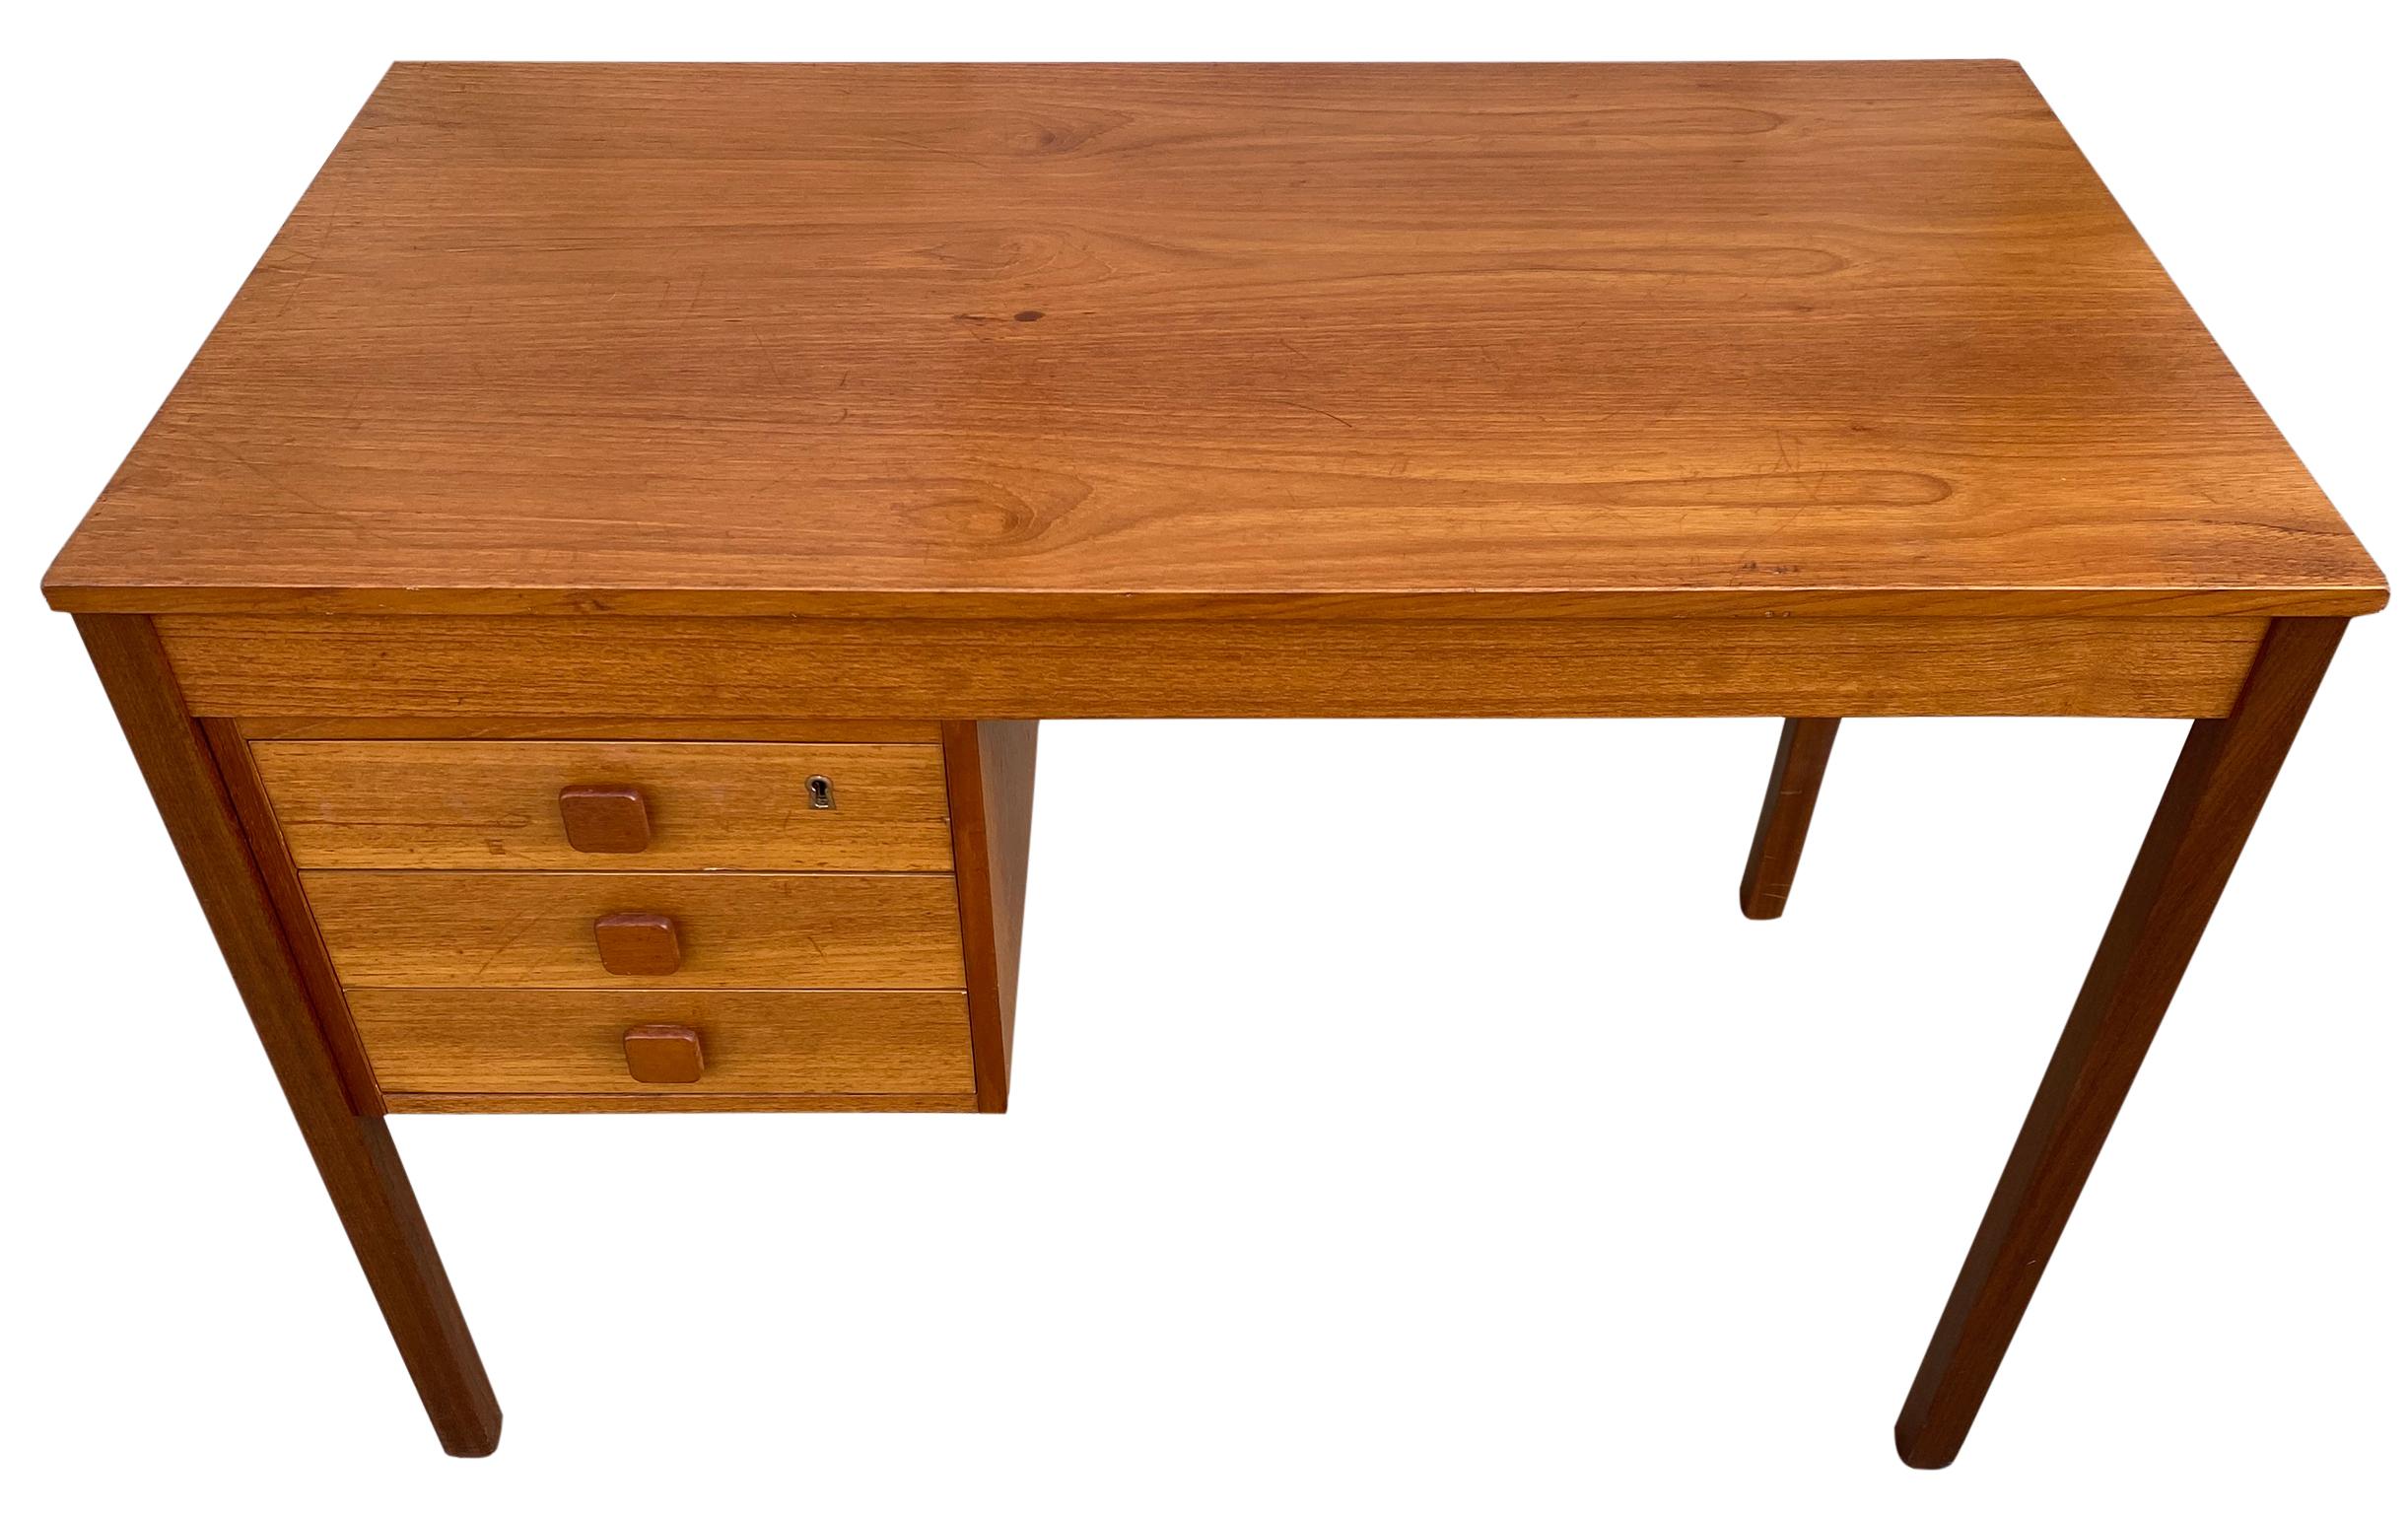 Great little midcentury Danish design desk with 3 drawers. Danish compact design. No labels, made in Denmark.